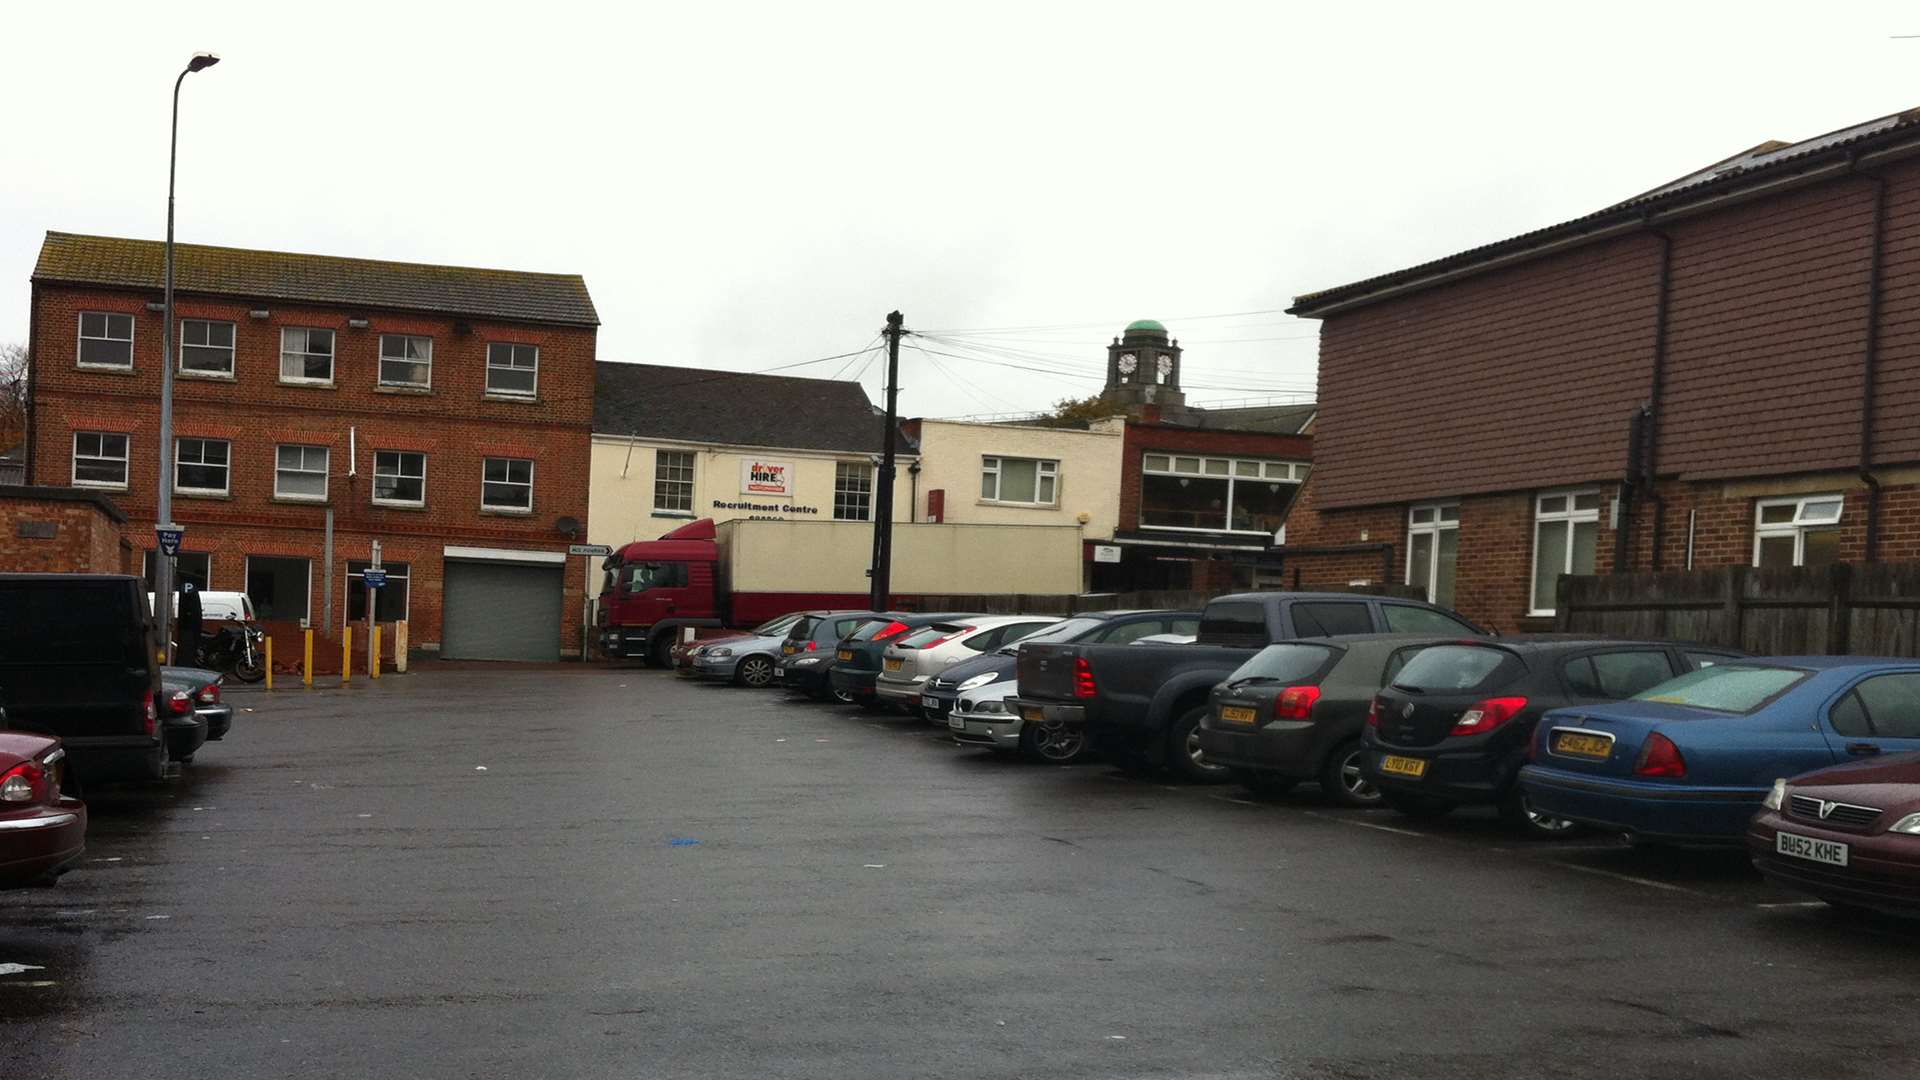 Paramedics called police after the man was discovered in this car park